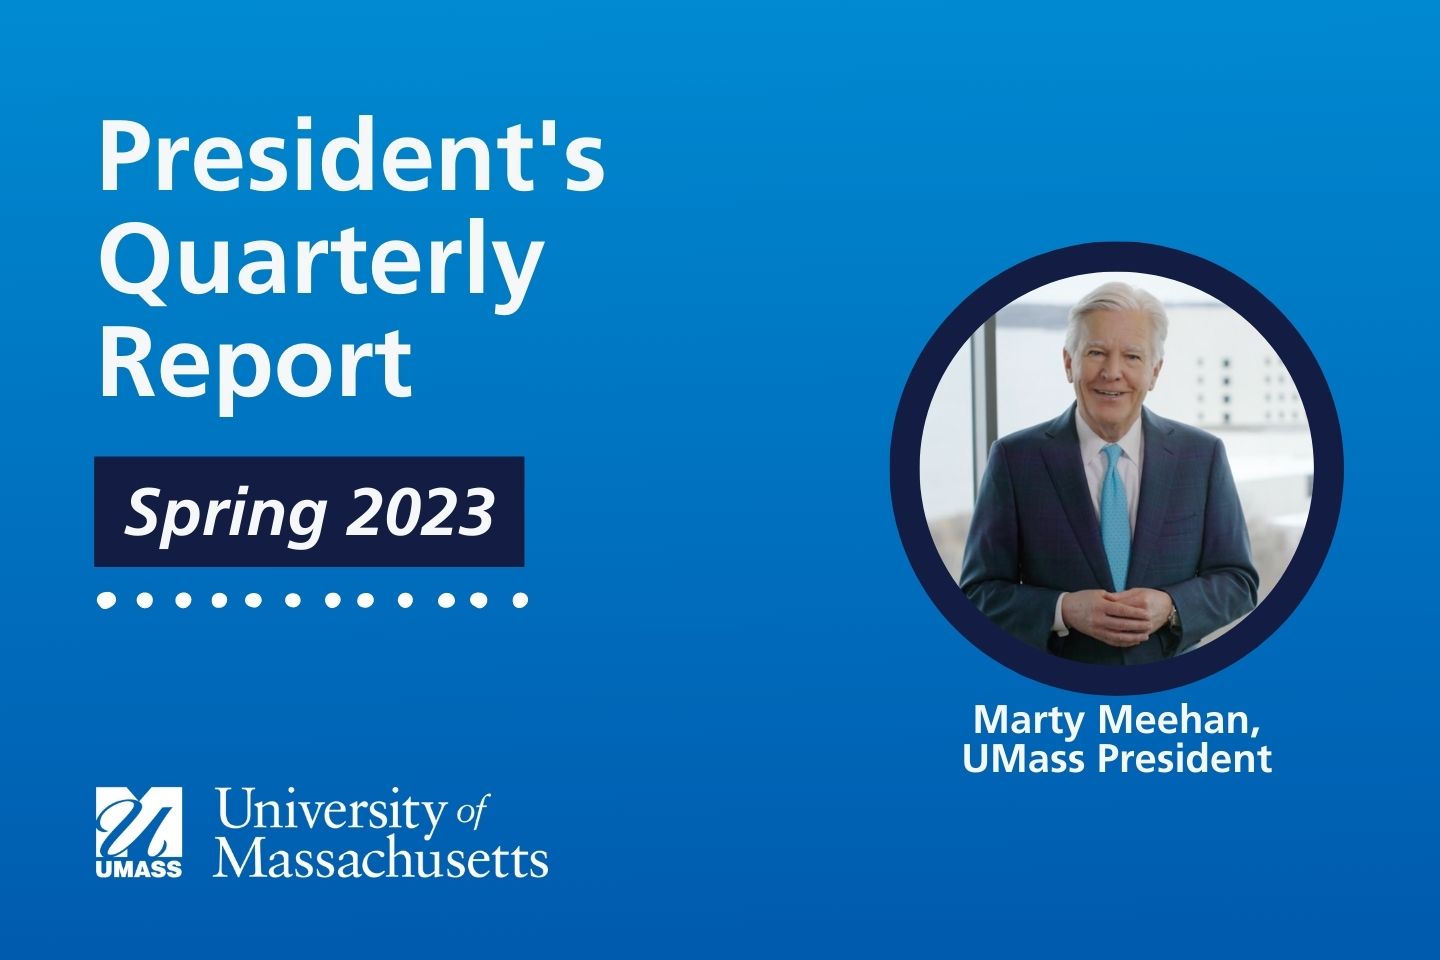 "President's Quarterly Report Spring 2023" featuring UMass President Marty Meehan's smiling picture along with his title and name.